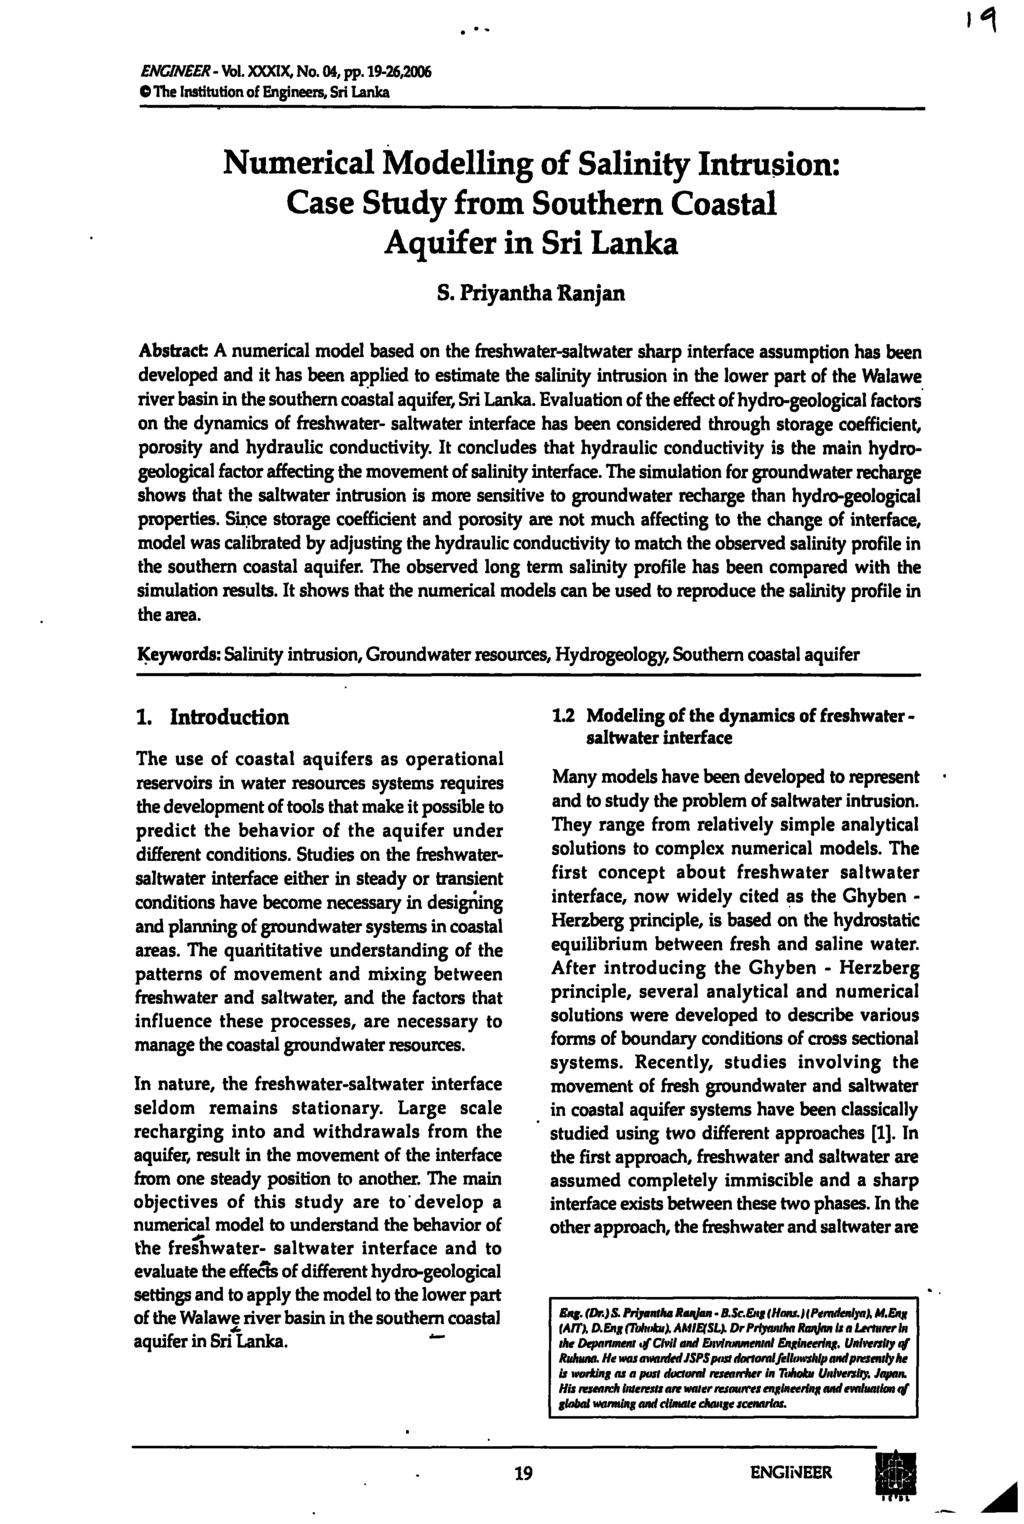 ENGINEER - Vol. XXXIX, No. 04, pp. 19-26,2006 0 The Institution of Engineers, Sri Lanka Numerical Modelling of Salinity Intrusion: Case Study from Southern Coastal Aquifer in Sri Lanka S.